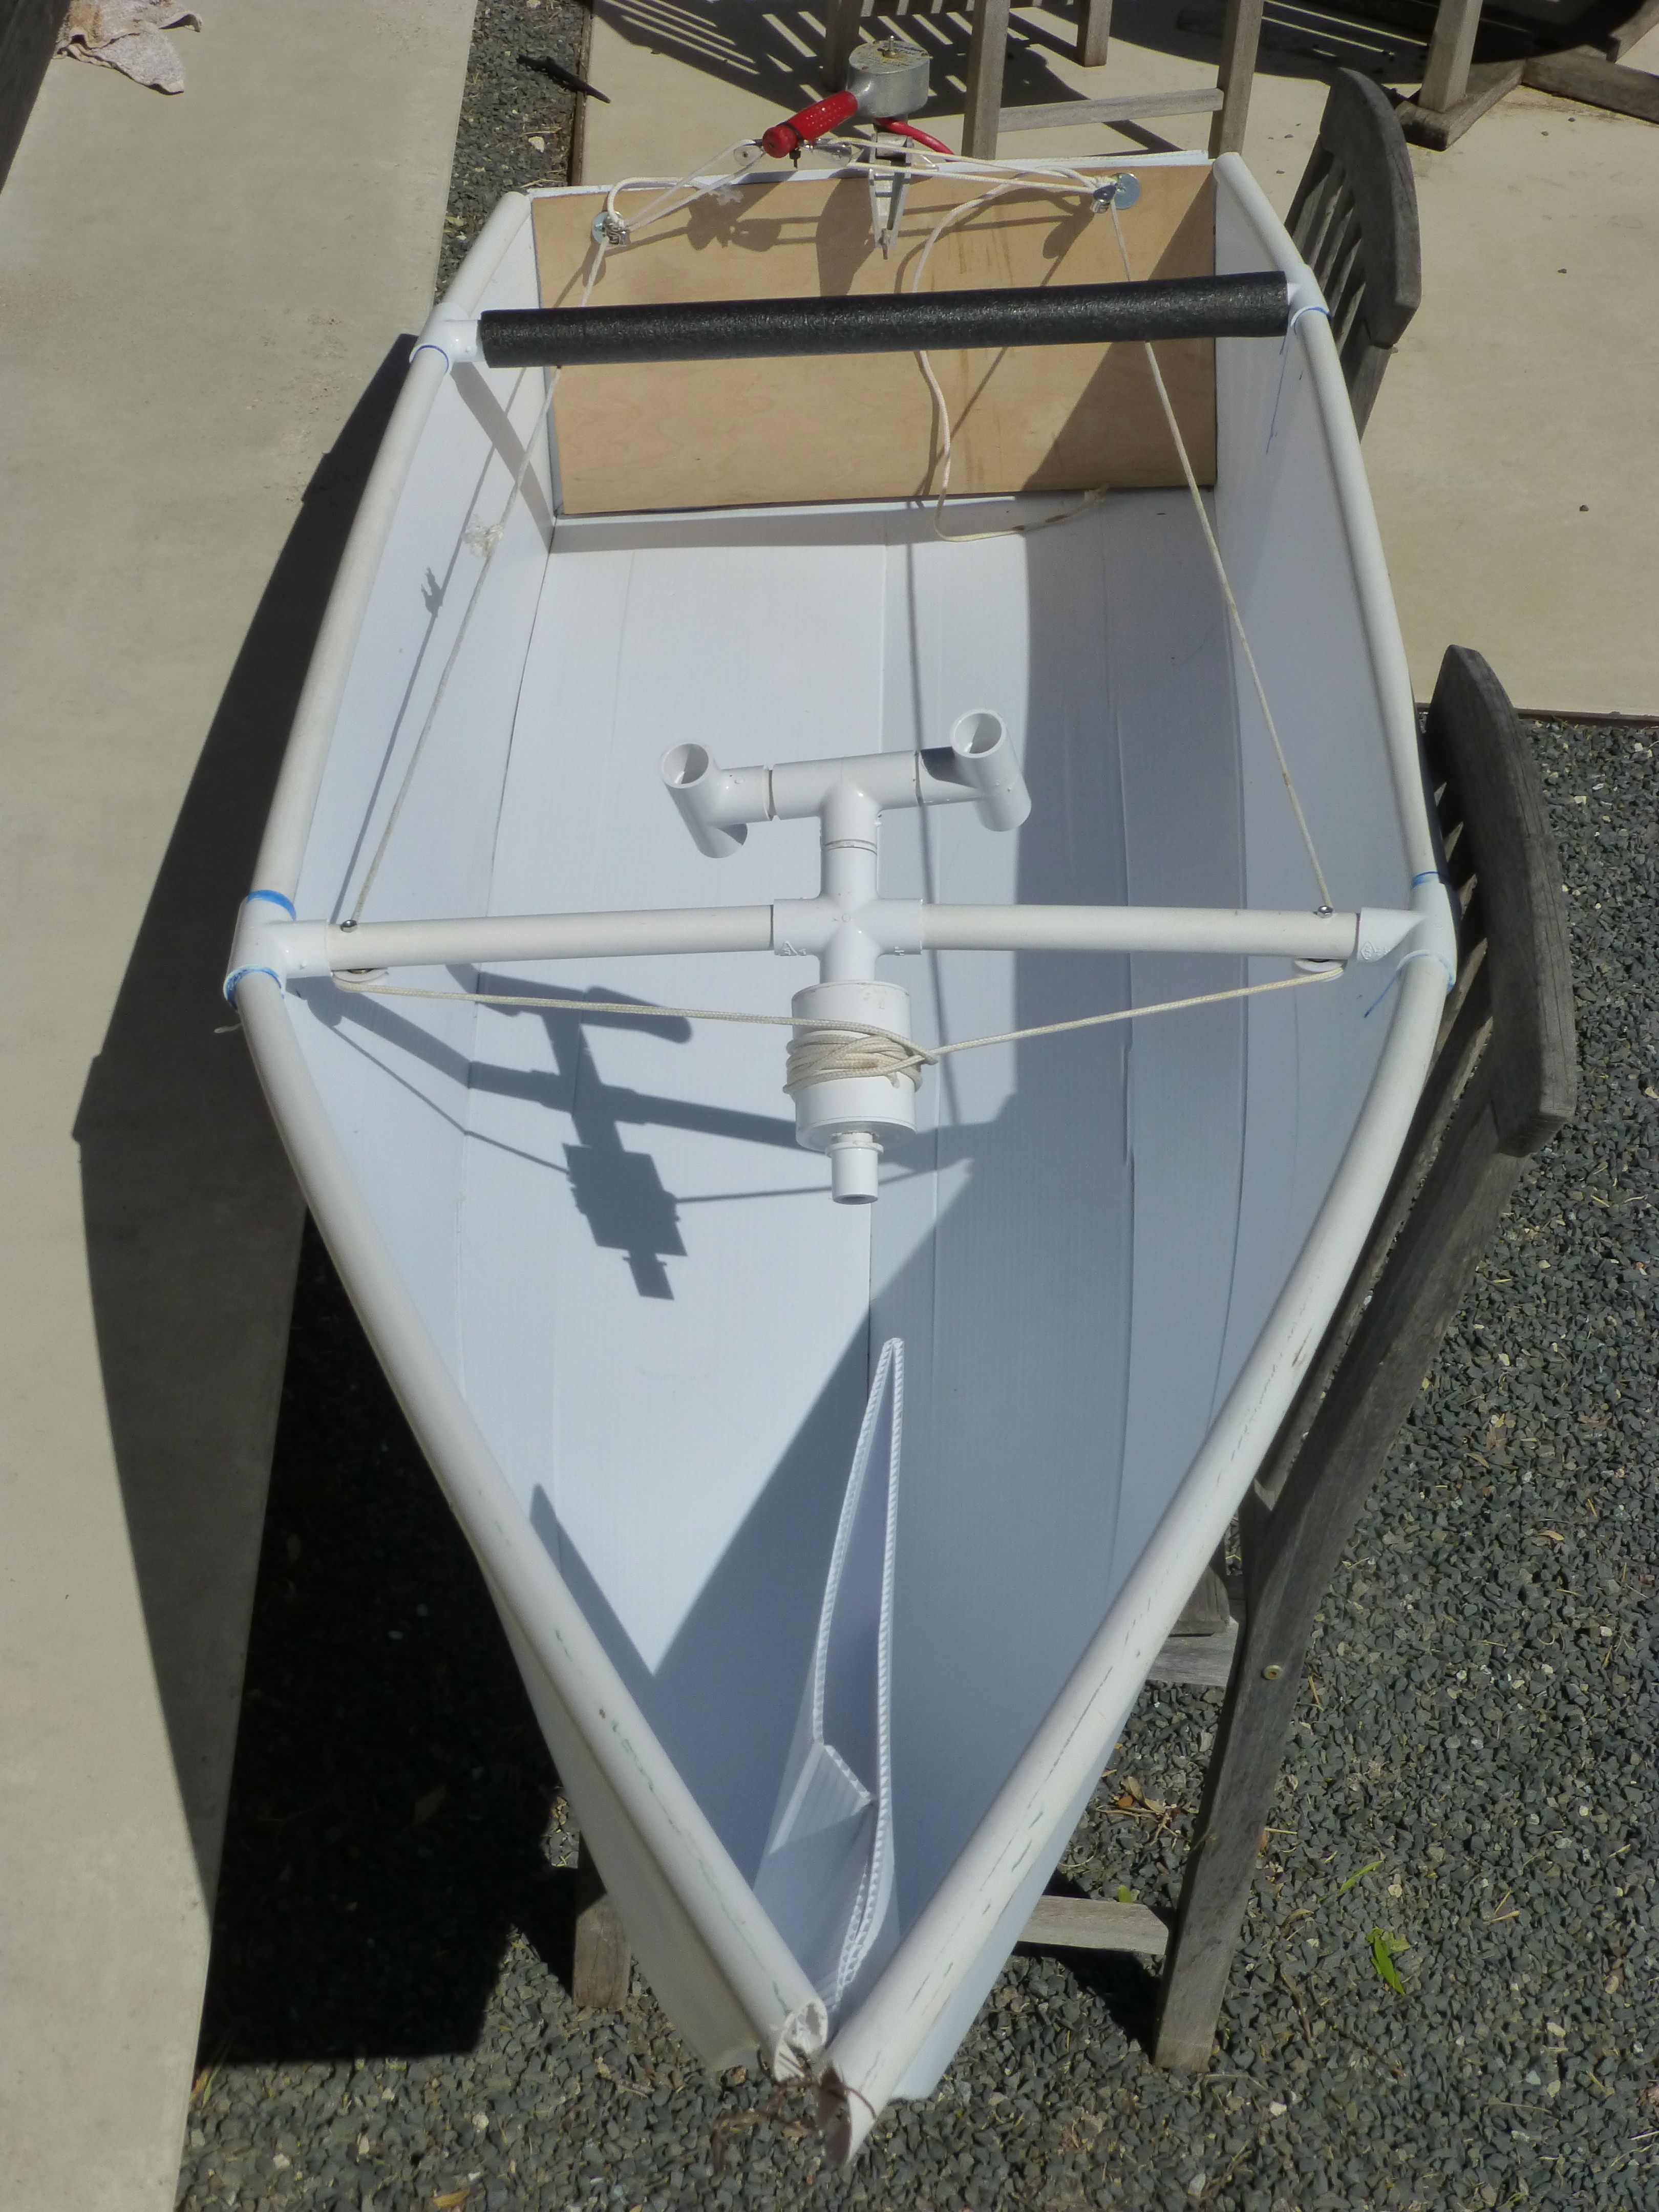 How to make a coroplast boat